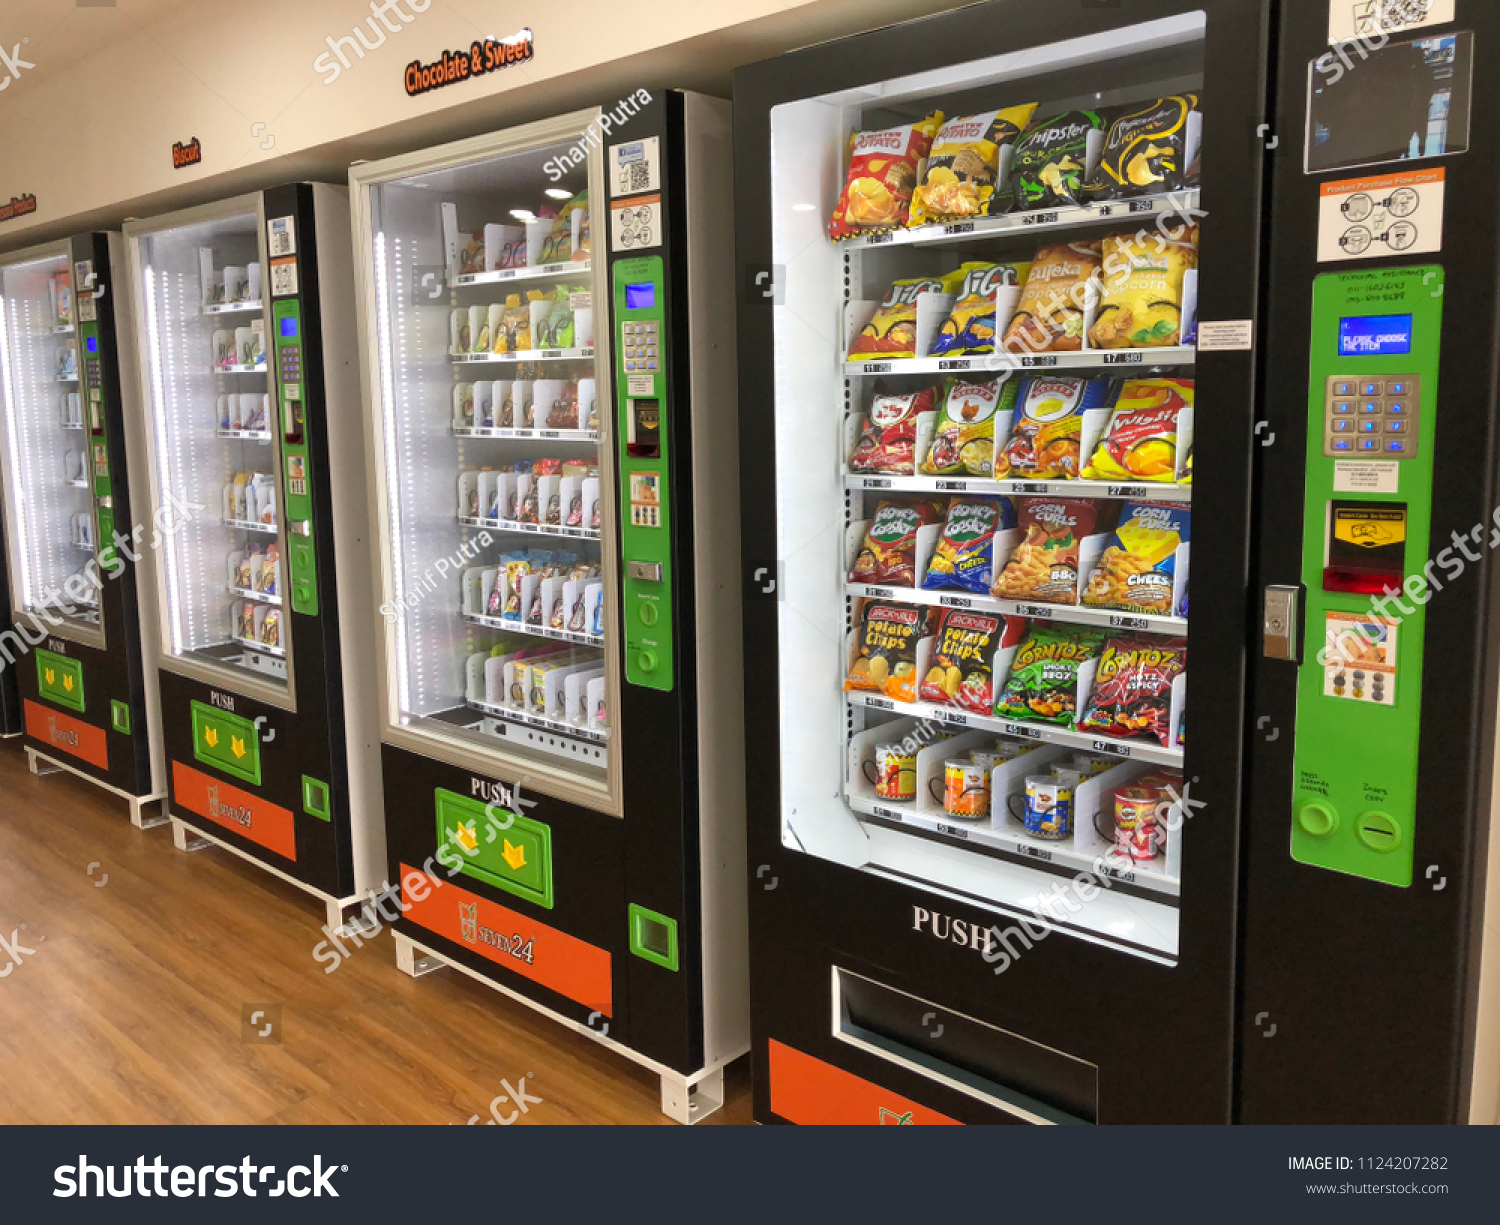 KOTA KINABALU,SABAH,MALAYSIA-July 1,2018: Seven 24  shop, First self-service convenience store in Malaysia. every item sold on a kiosk machine that can be purchased by cash money. #1124207282